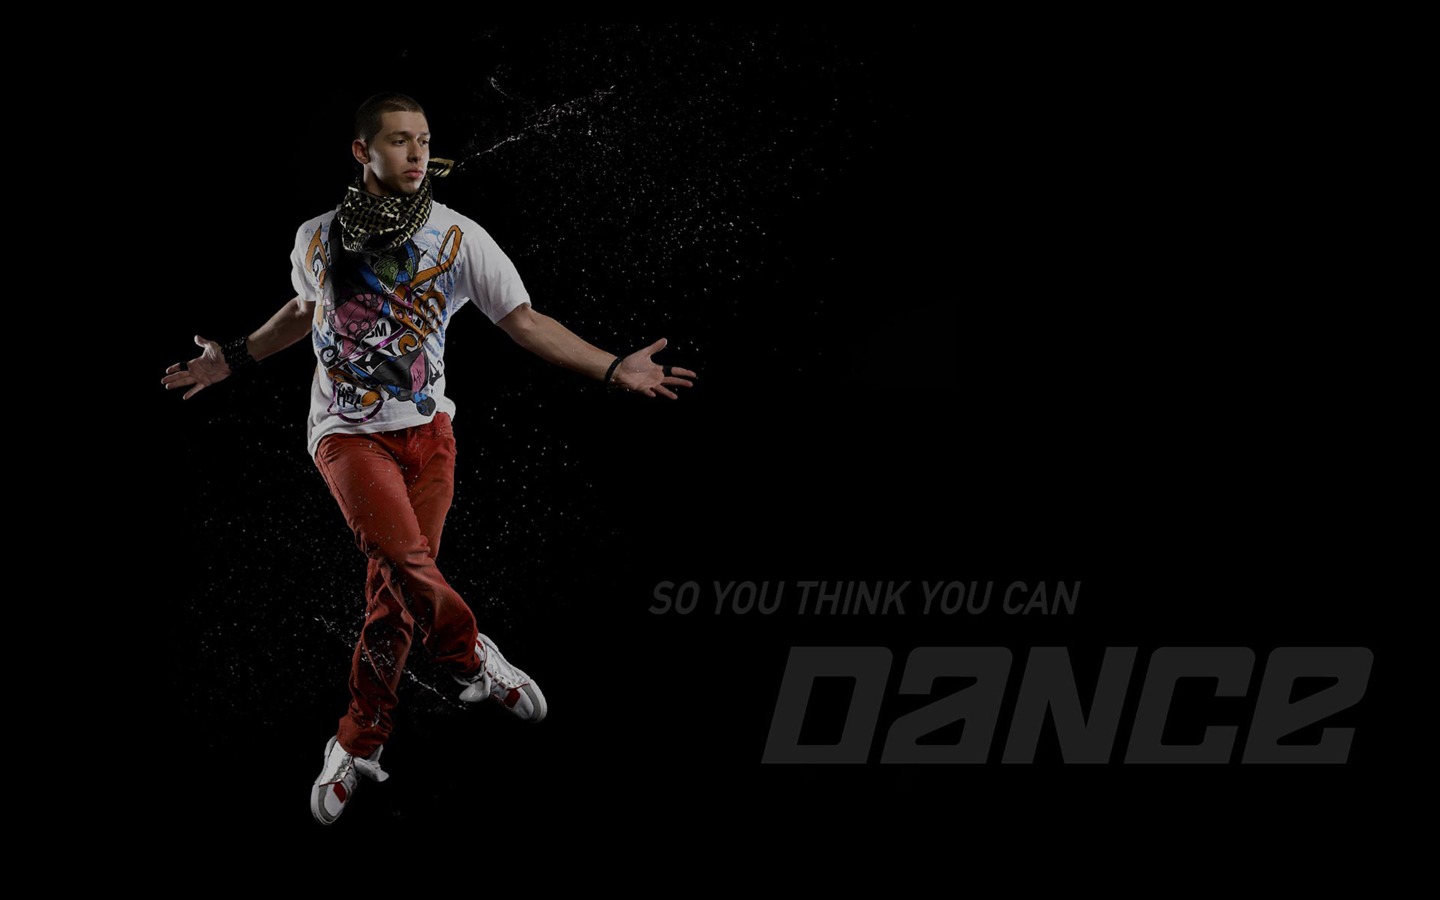 So You Think You Can Dance 舞林争霸 壁纸(一)16 - 1440x900